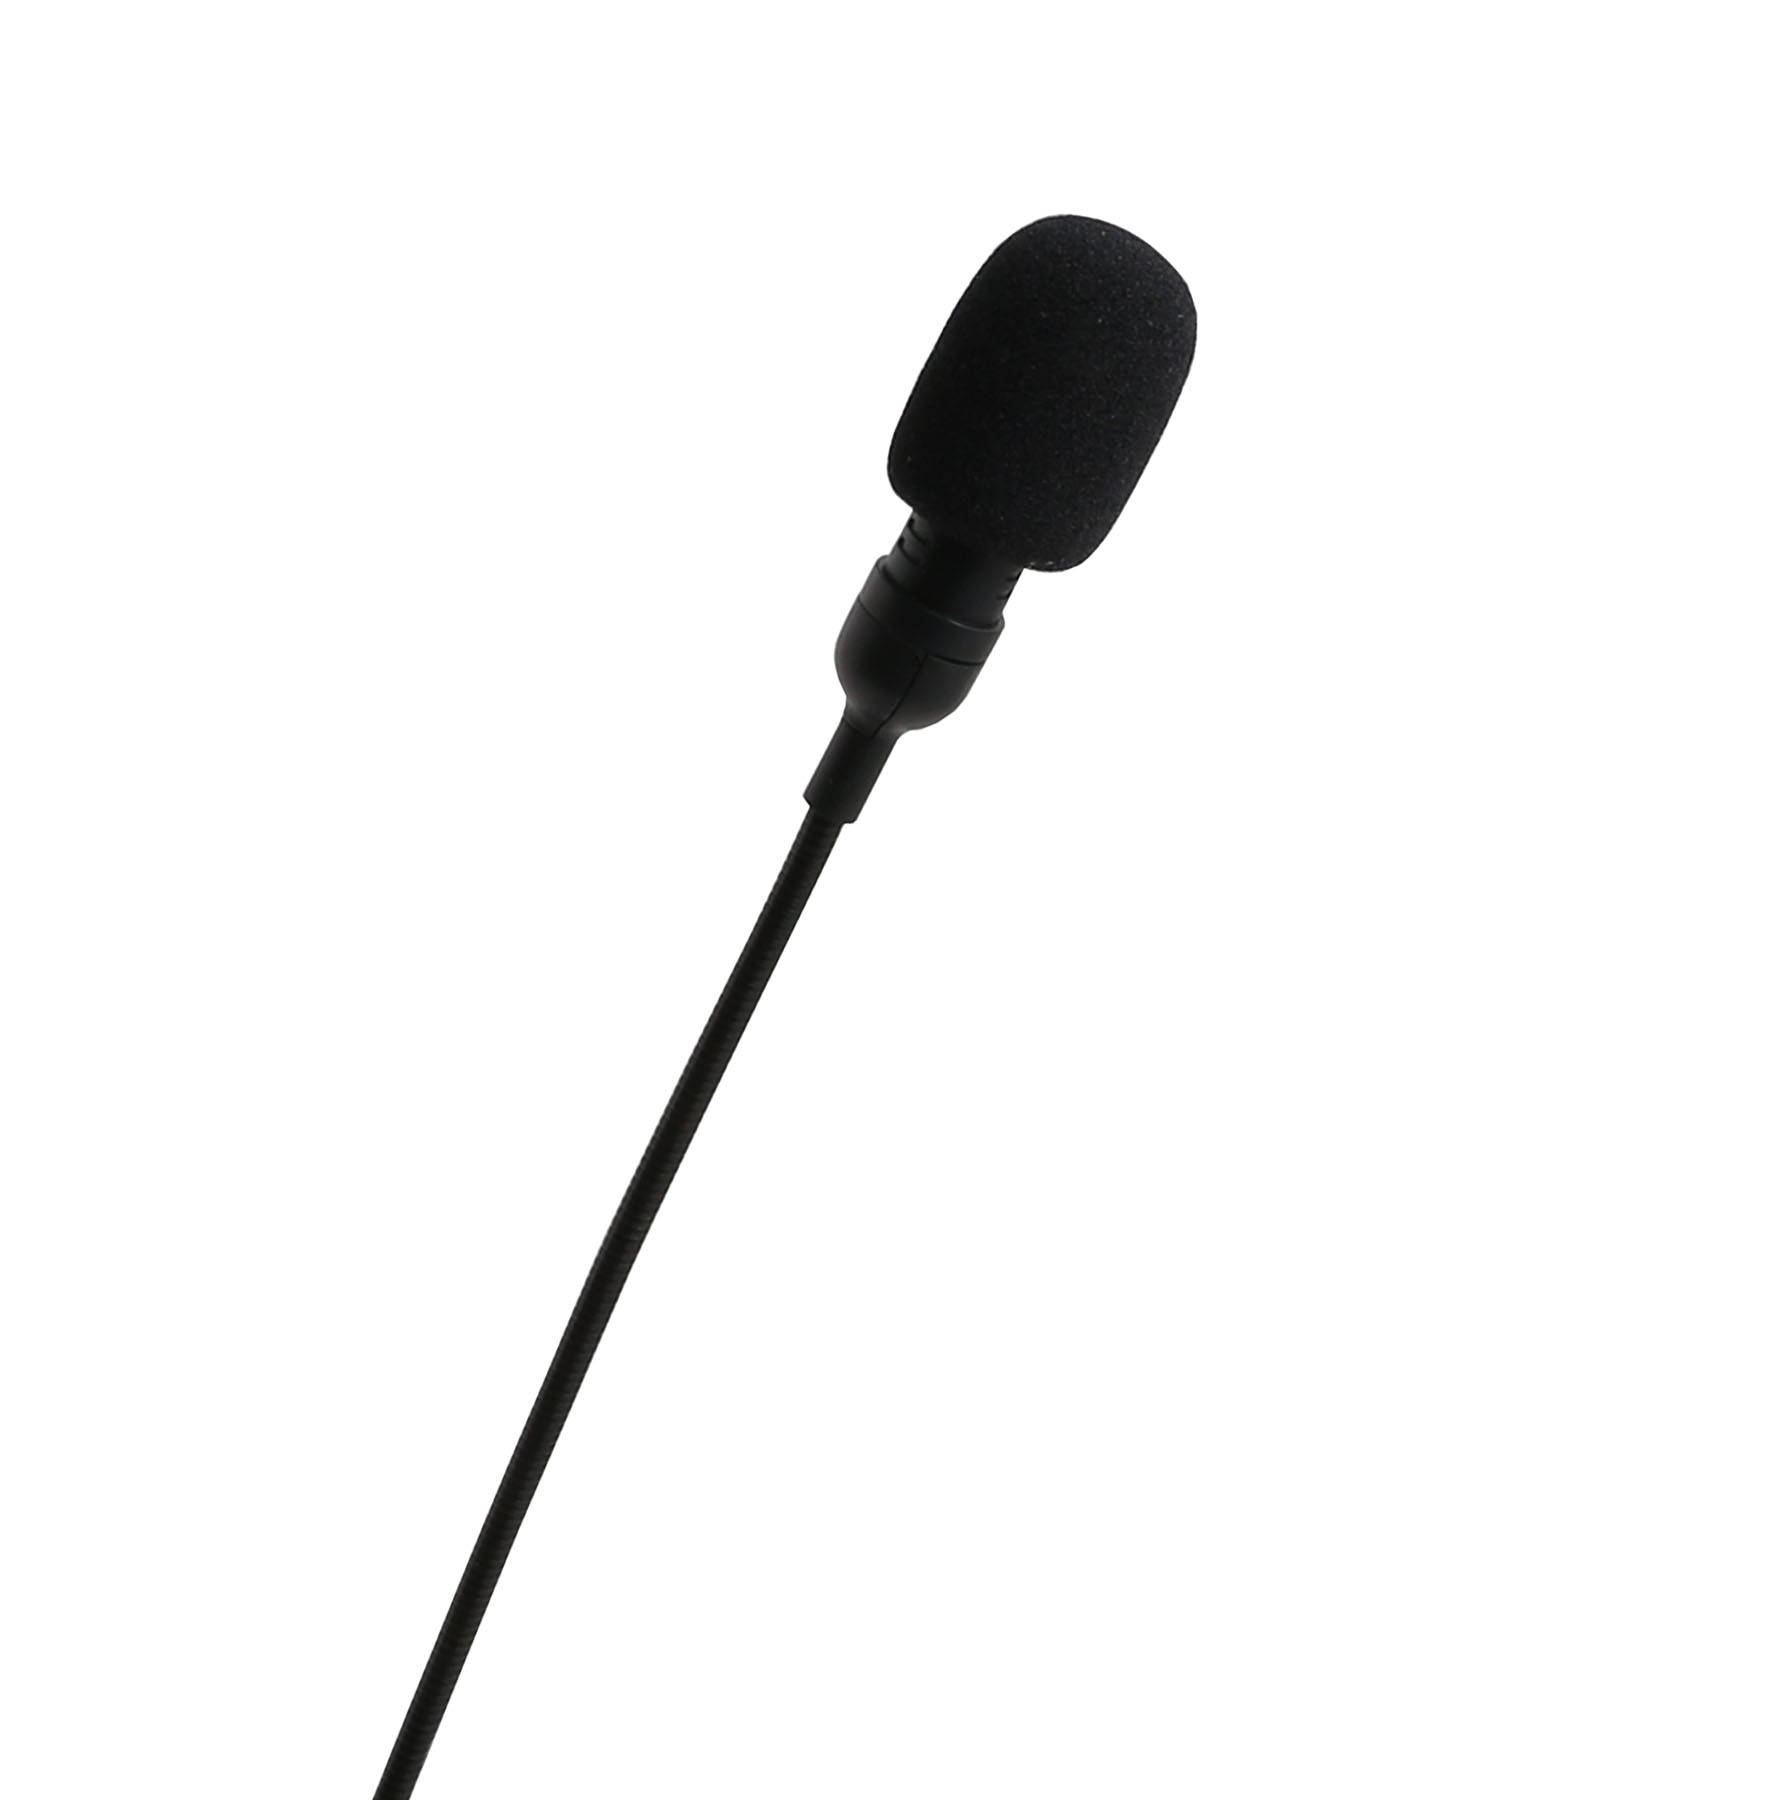 SYBA Multimedia Connectland CL-ME-606 Wired Microphone - image 3 of 4